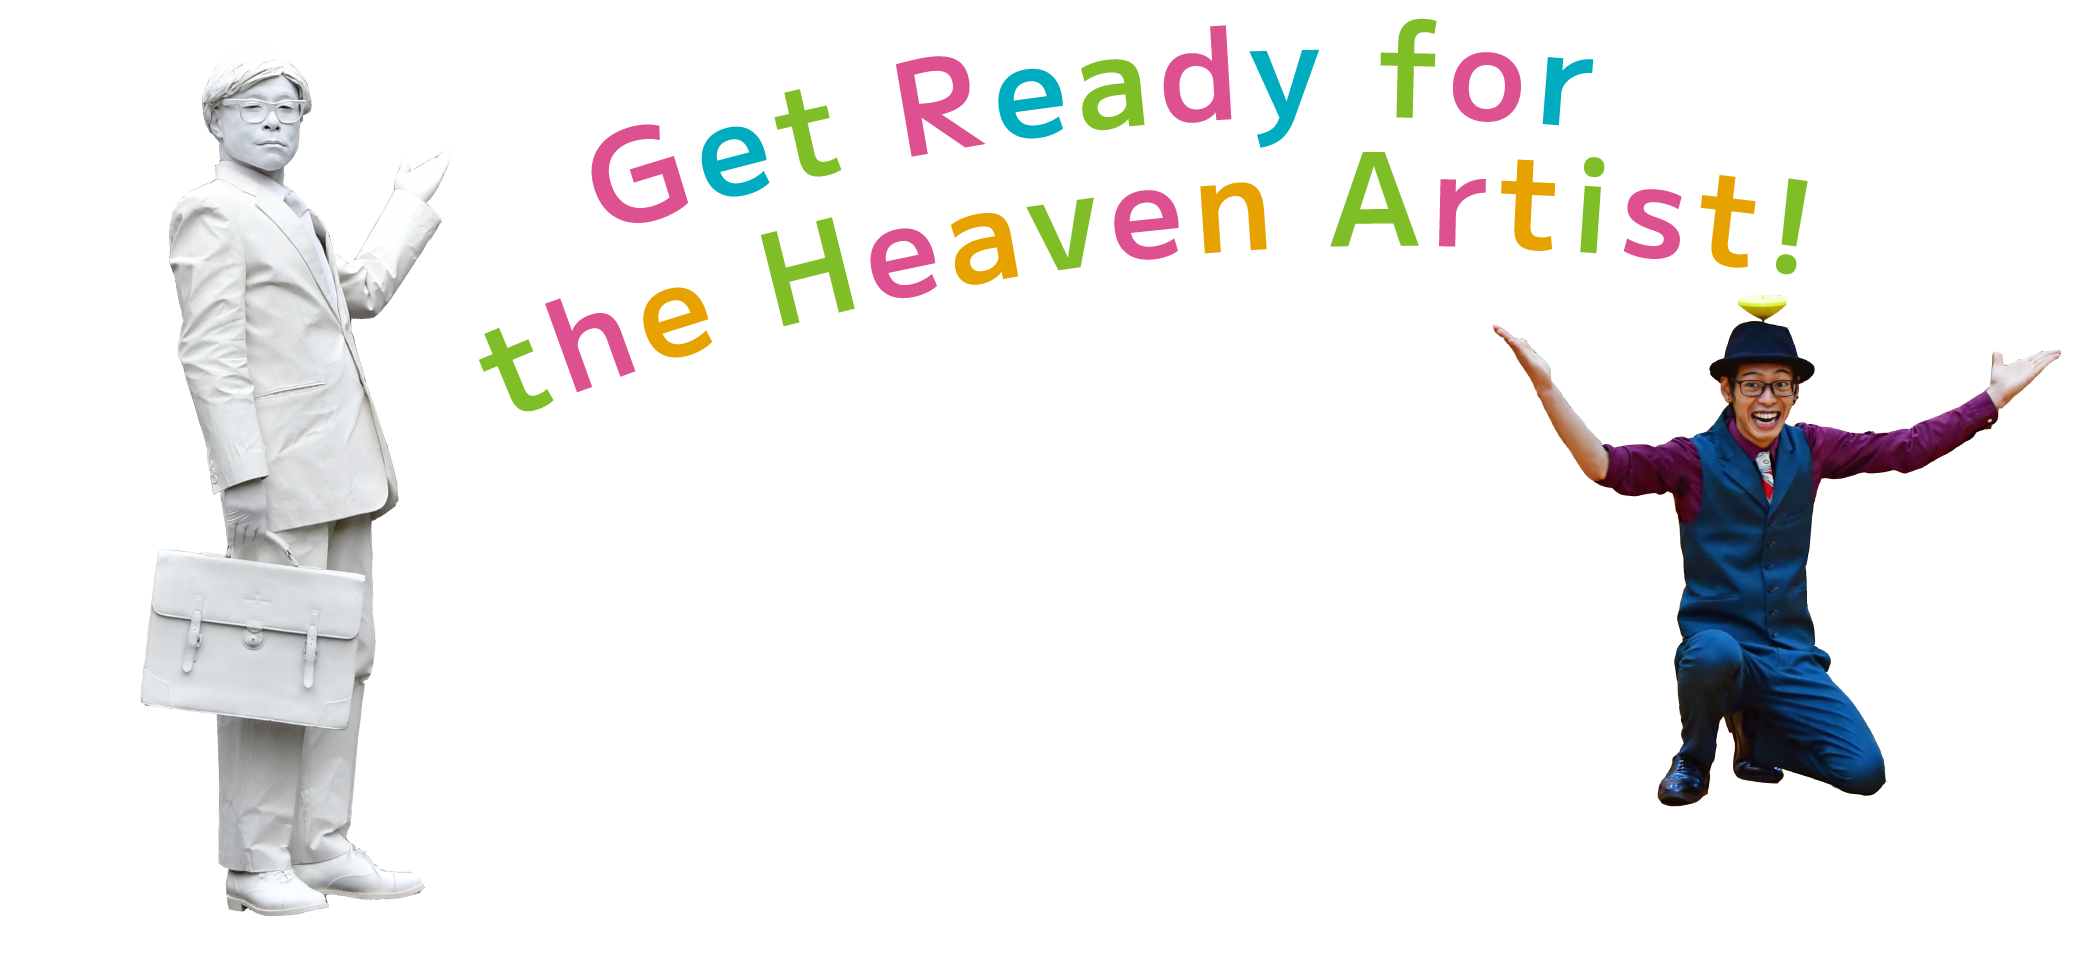 Get Ready for the Heaven Artist!